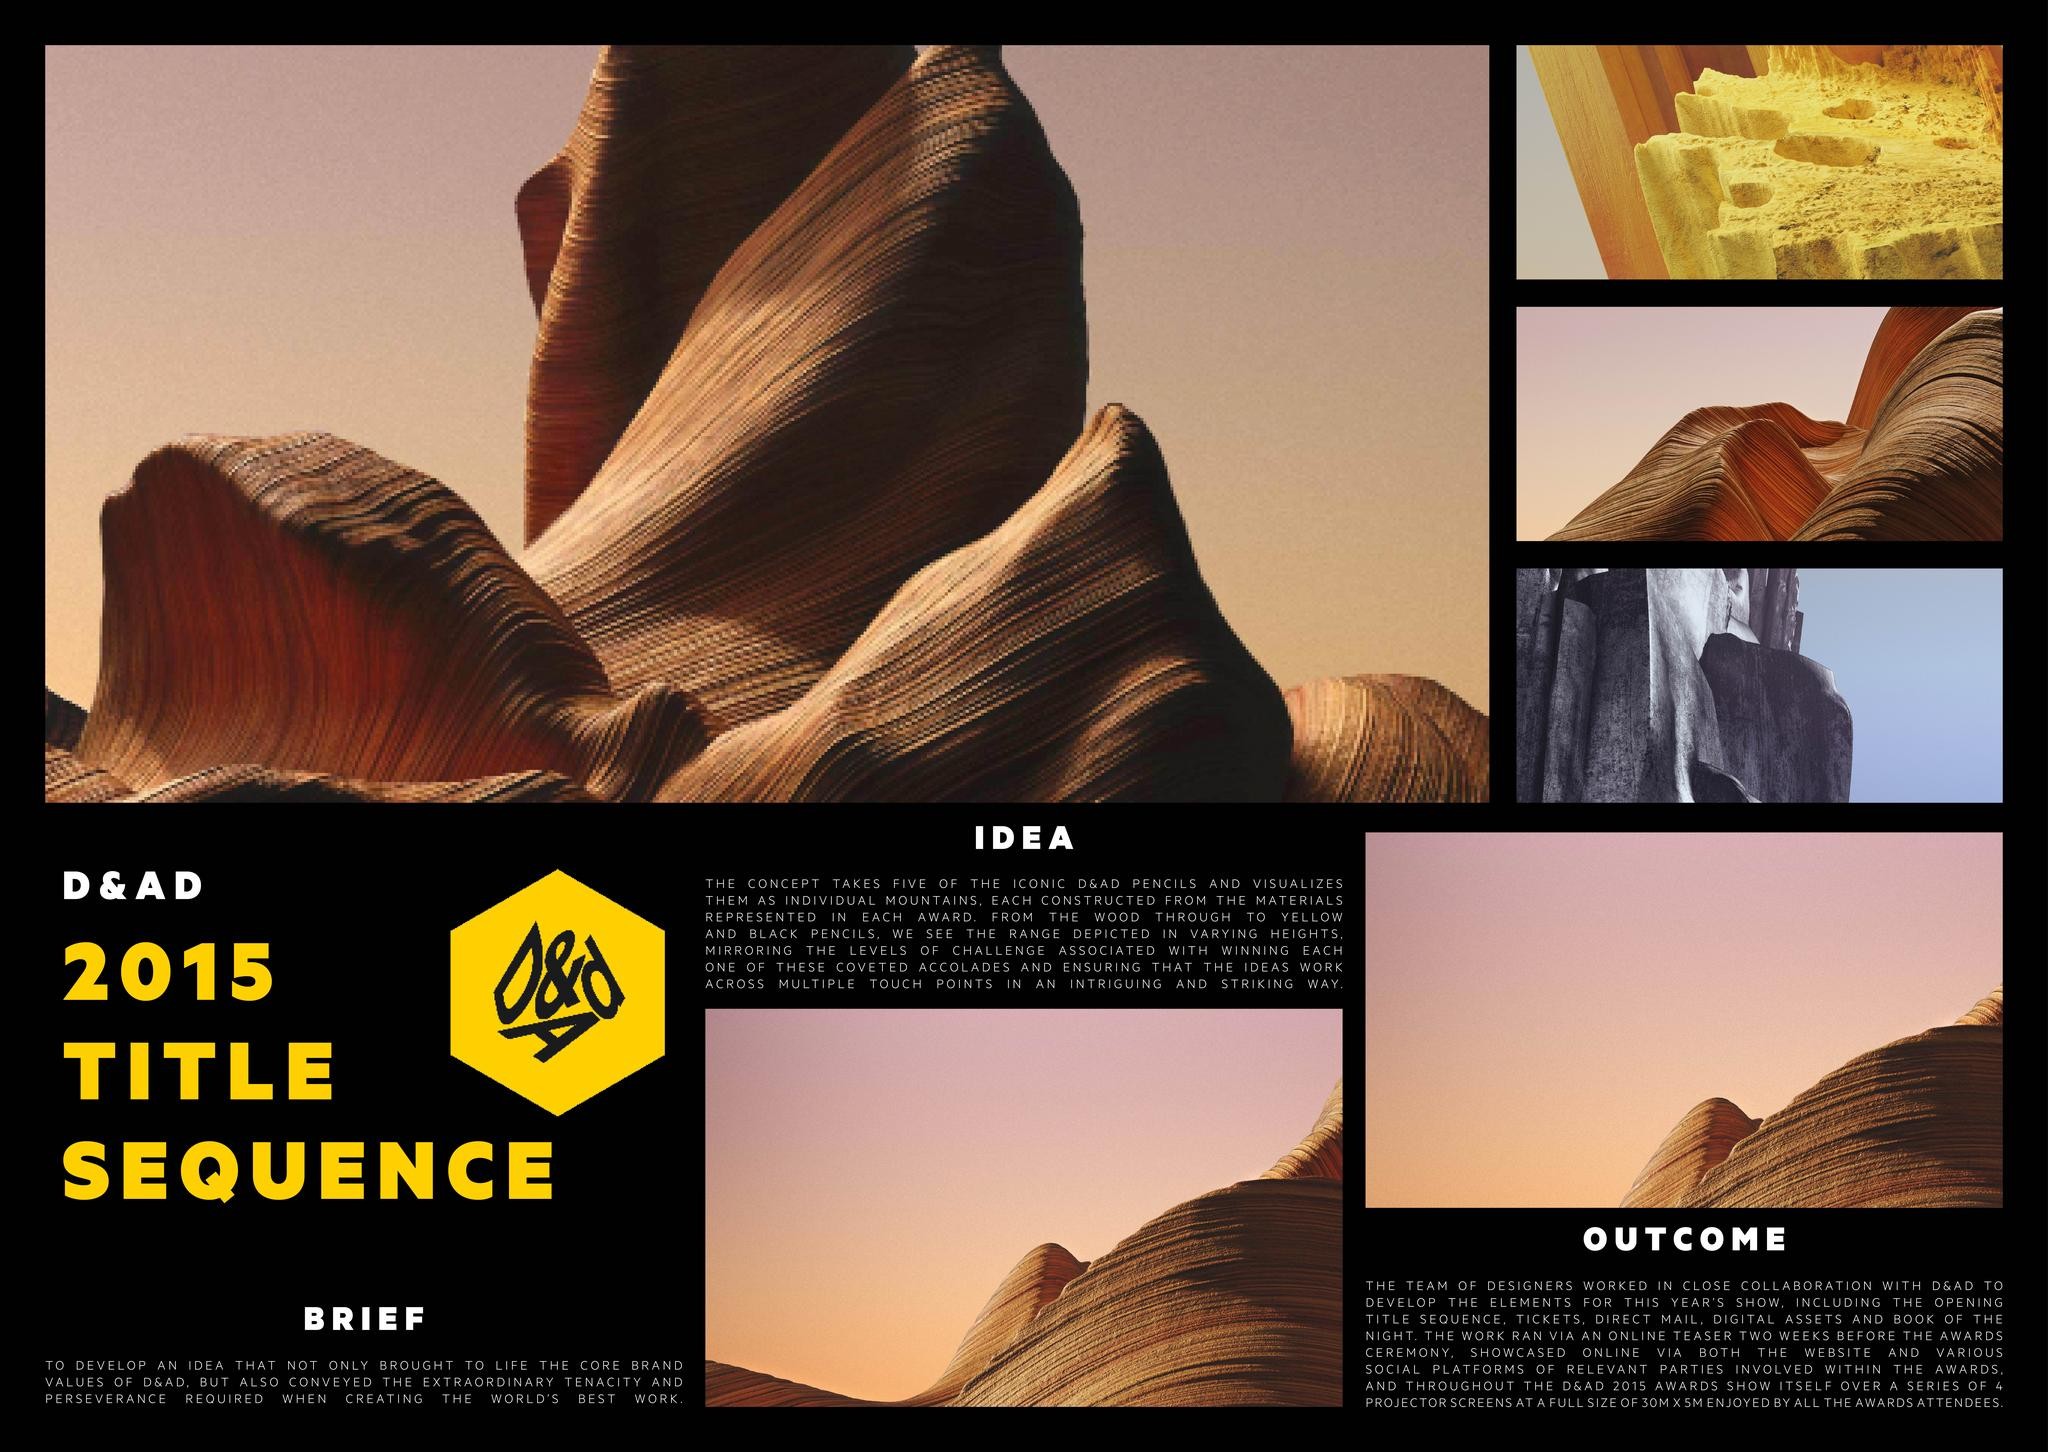 D&AD 2015 Title Sequence